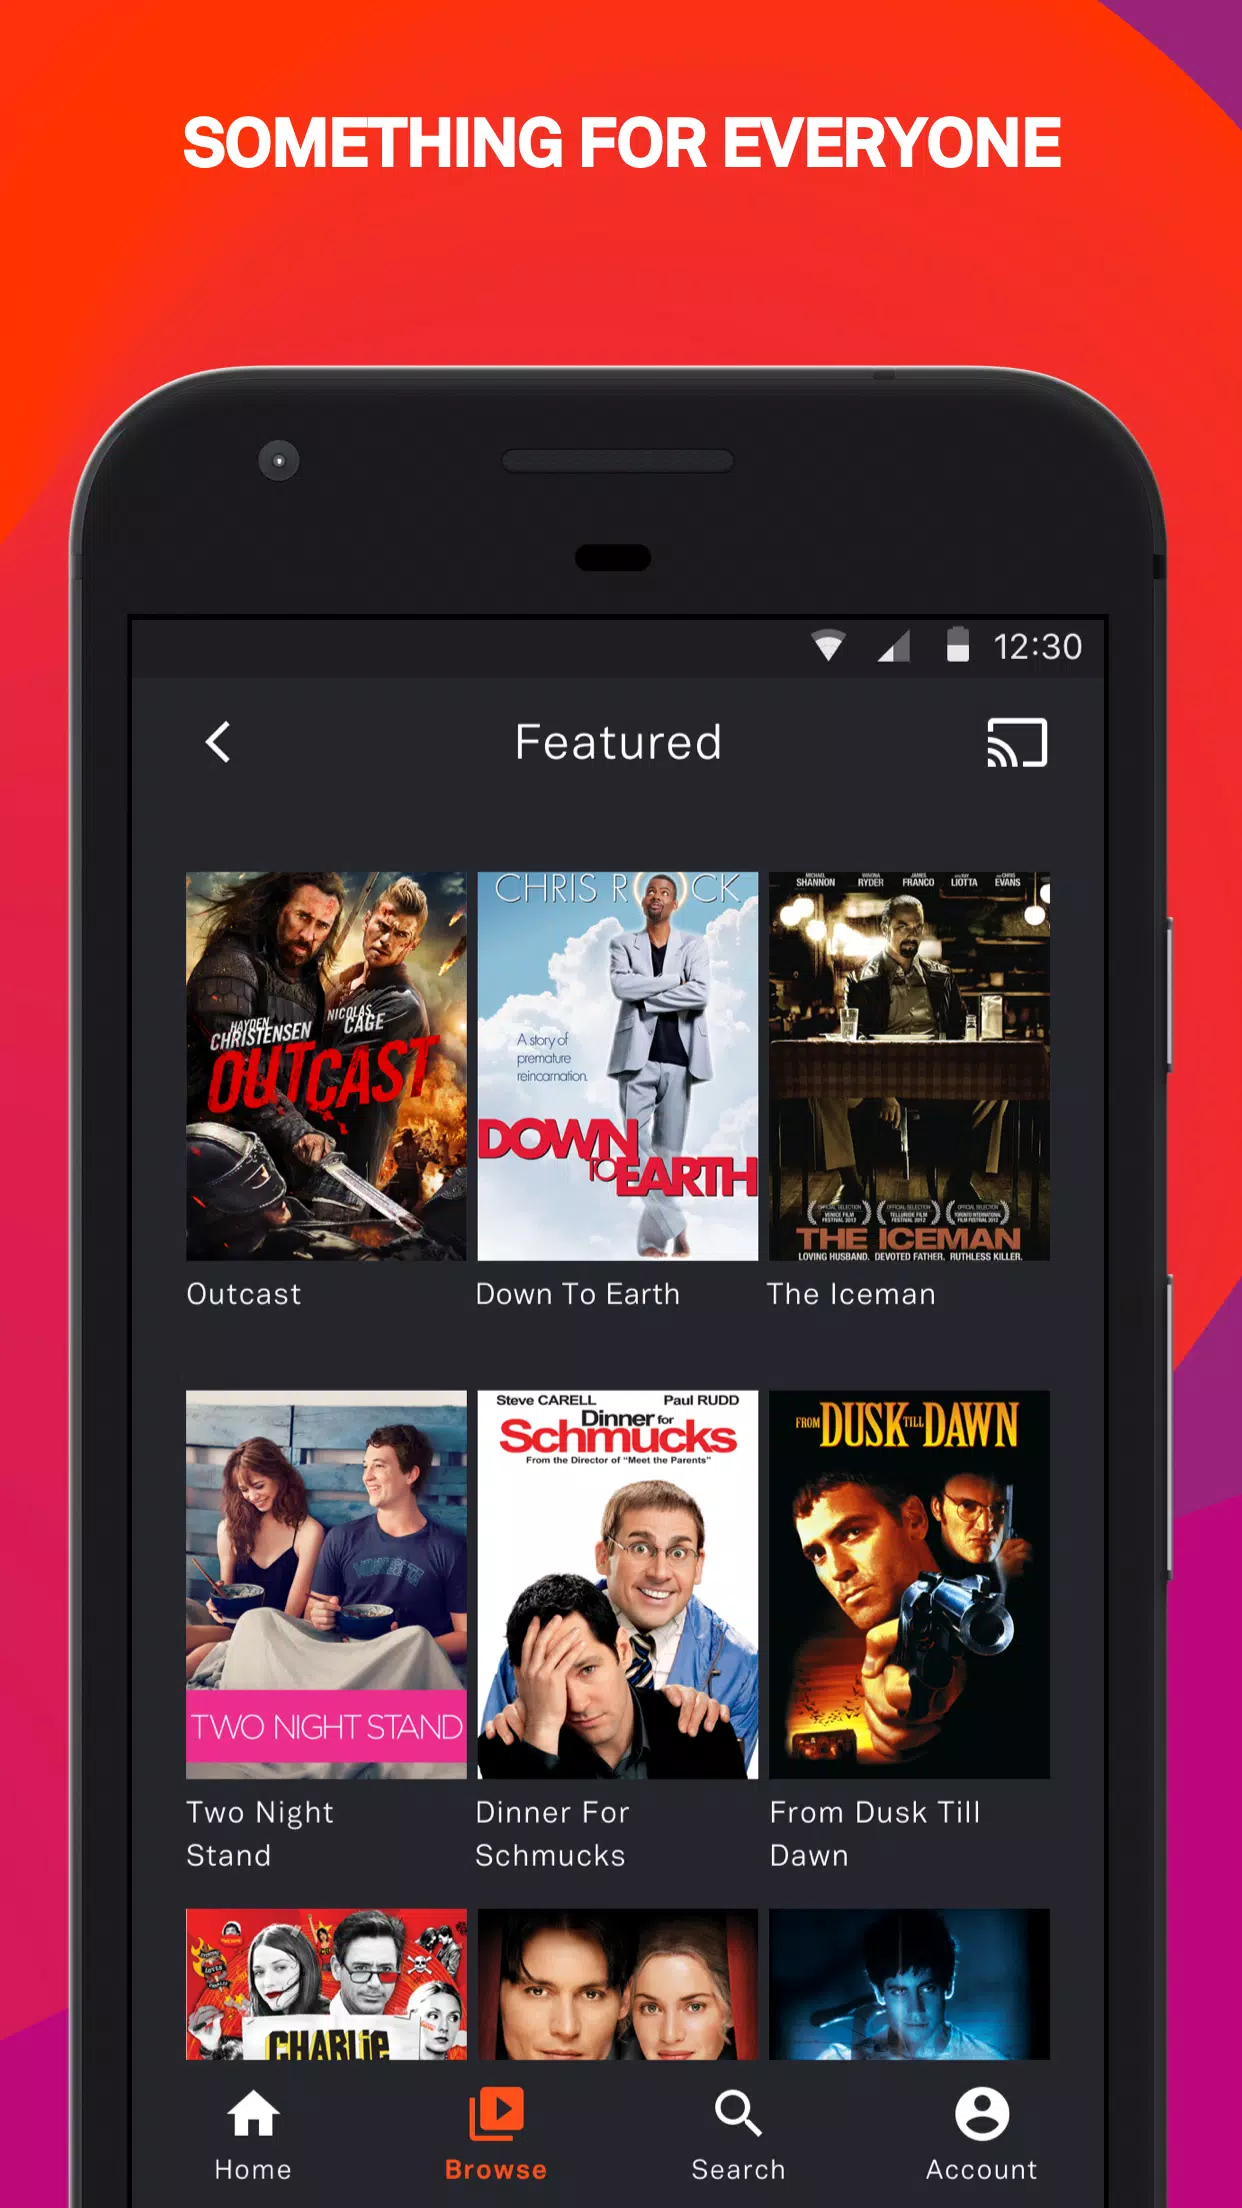 Download from tubitv evil hub download